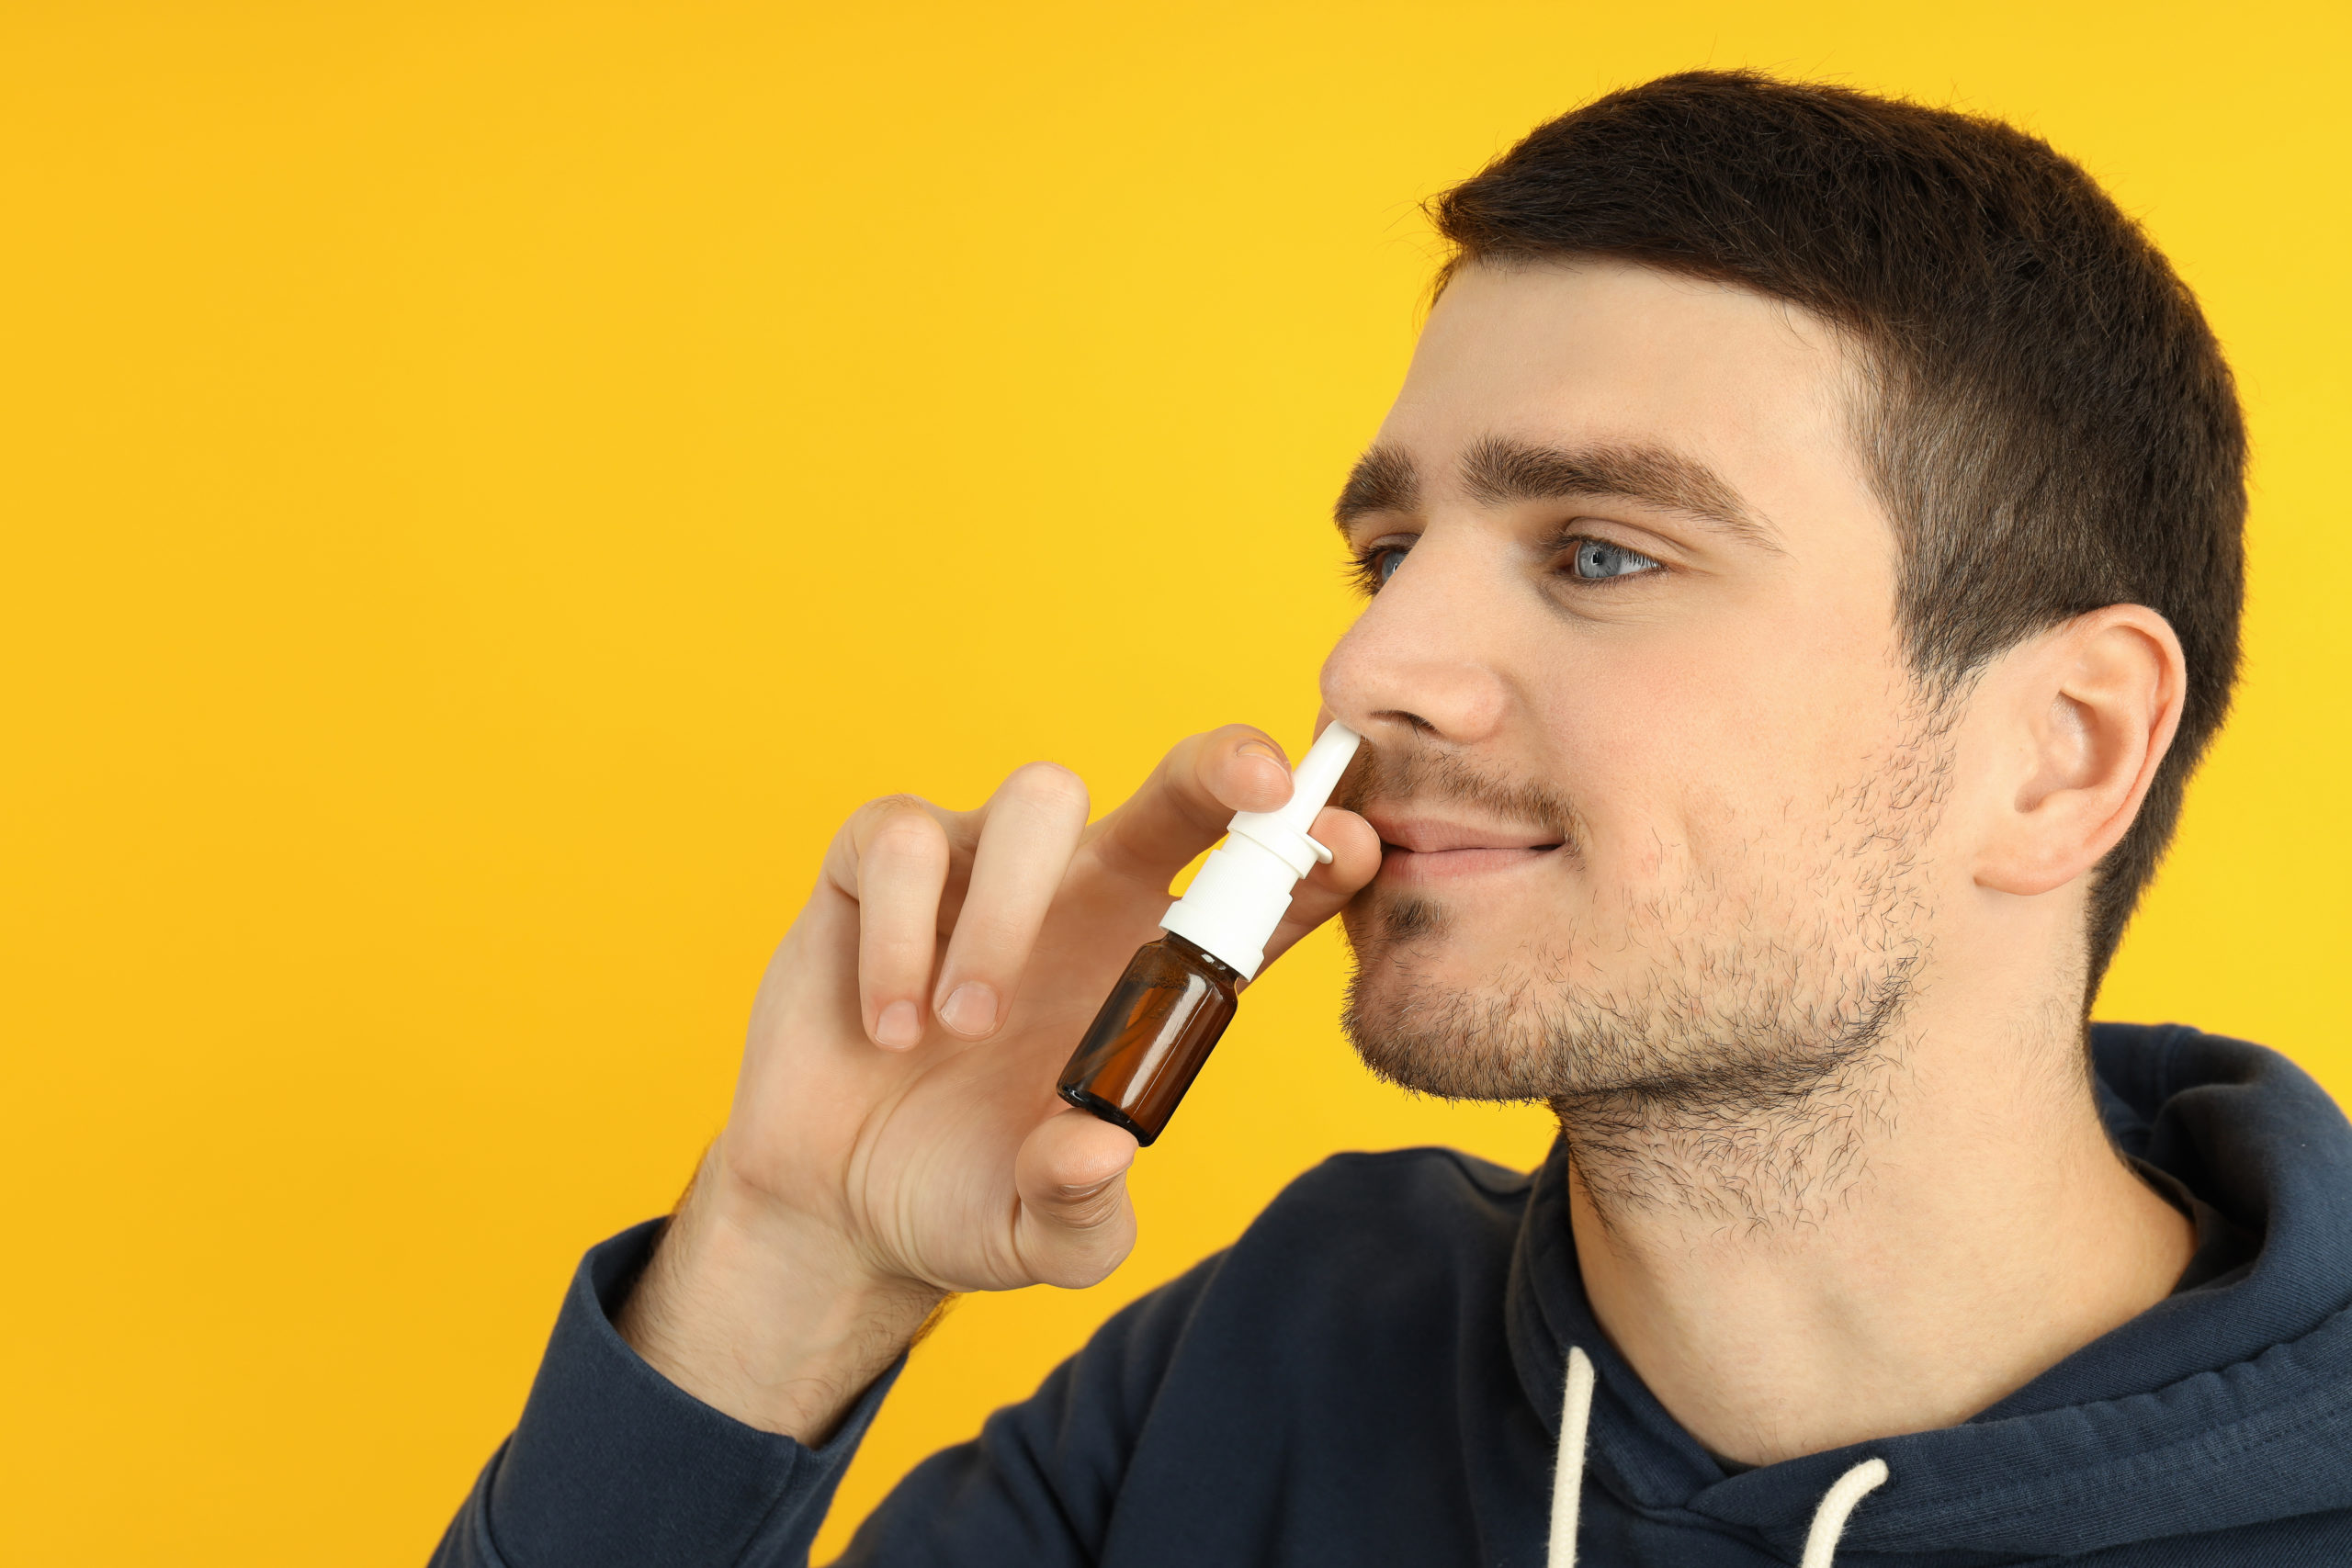 MT2 Nasal spray compared to melanotan injections